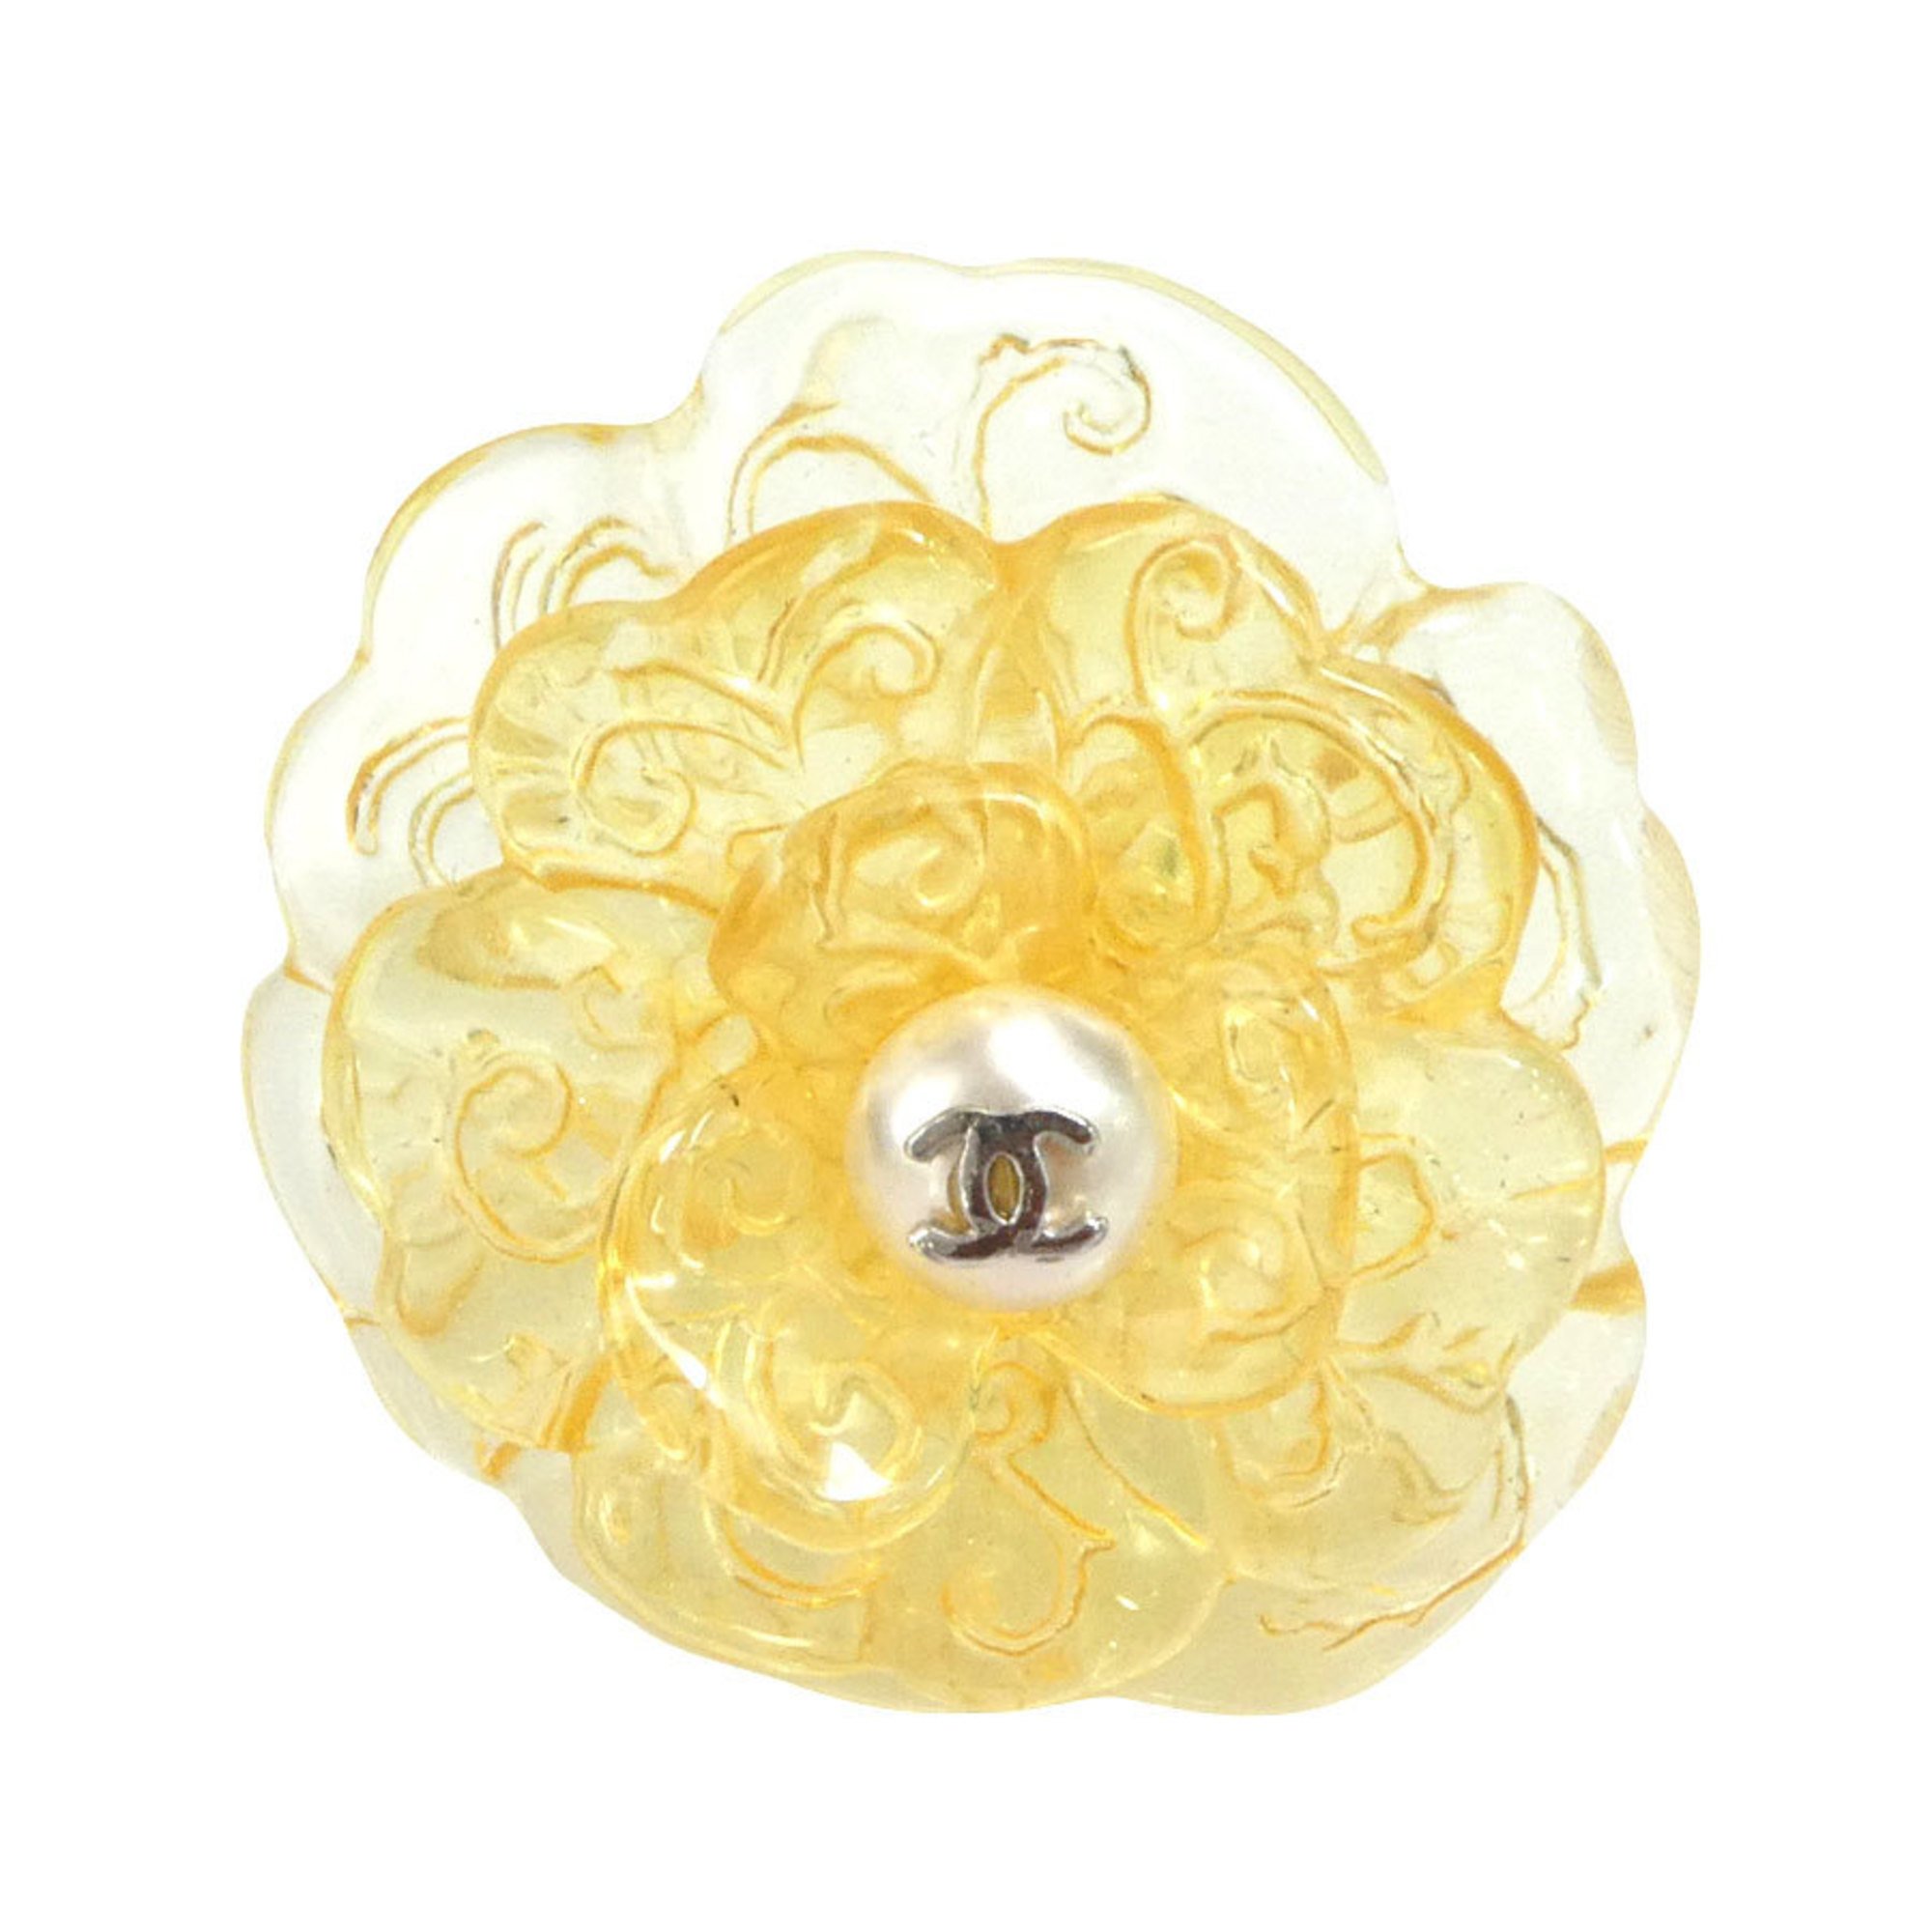 CHANEL Ring, Resin/Faux Pearl, Clear, Women's, Size 12, H30248F